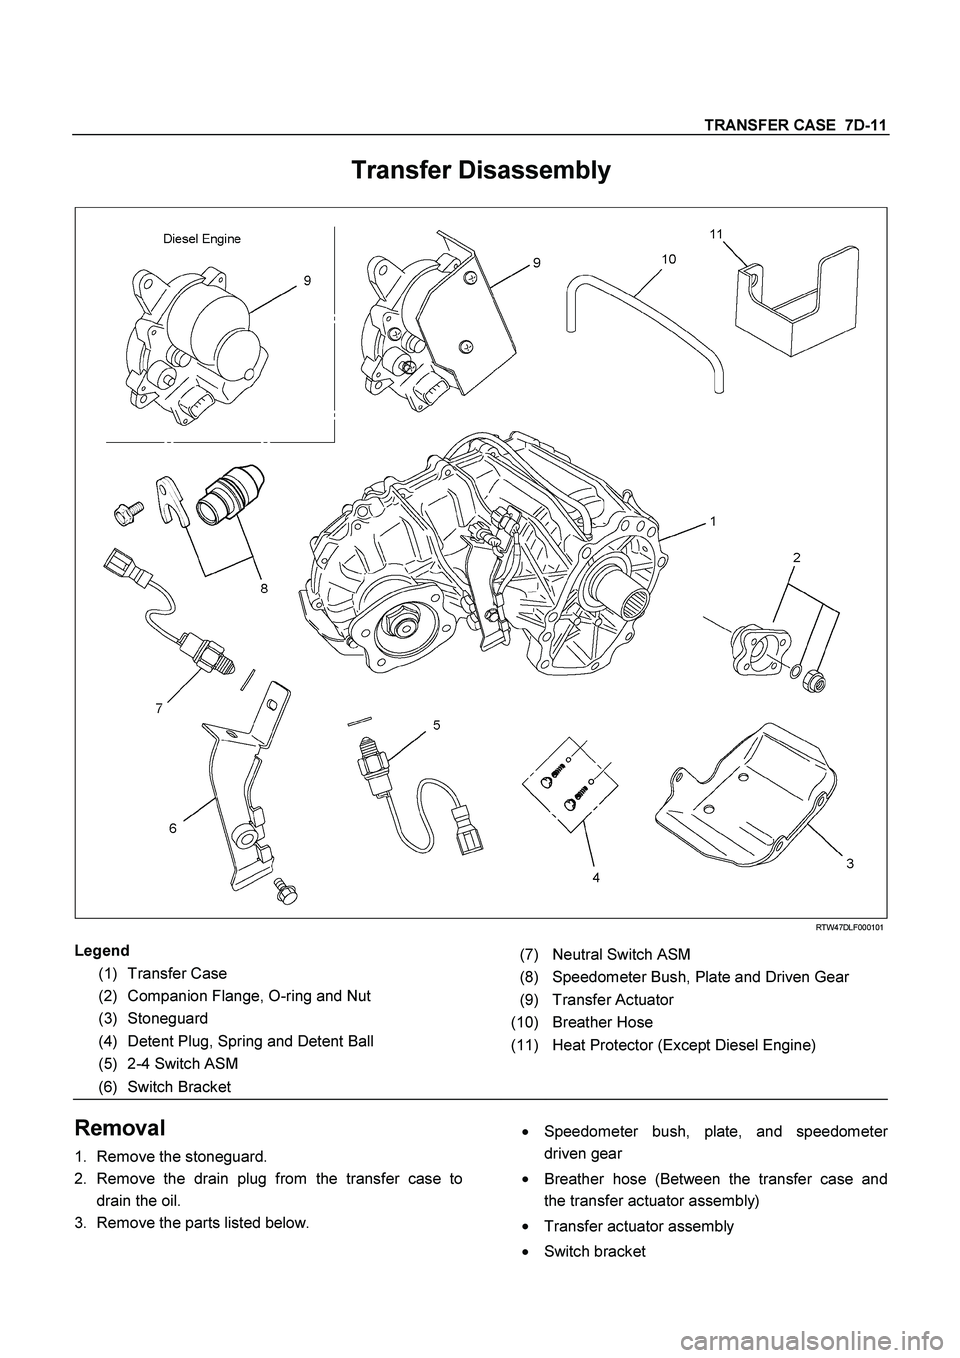 ISUZU TF SERIES 2004  Workshop Manual TRANSFER CASE  7D-11
 
Transfer Disassembly 
  
  RTW47DLF000101 
Legend
 
 
(7) Neutral Switch ASM 
(1) Transfer Case 
 
(8) Speedometer Bush, Plate and Driven Gear 
(2) Companion Flange, O-ring and 